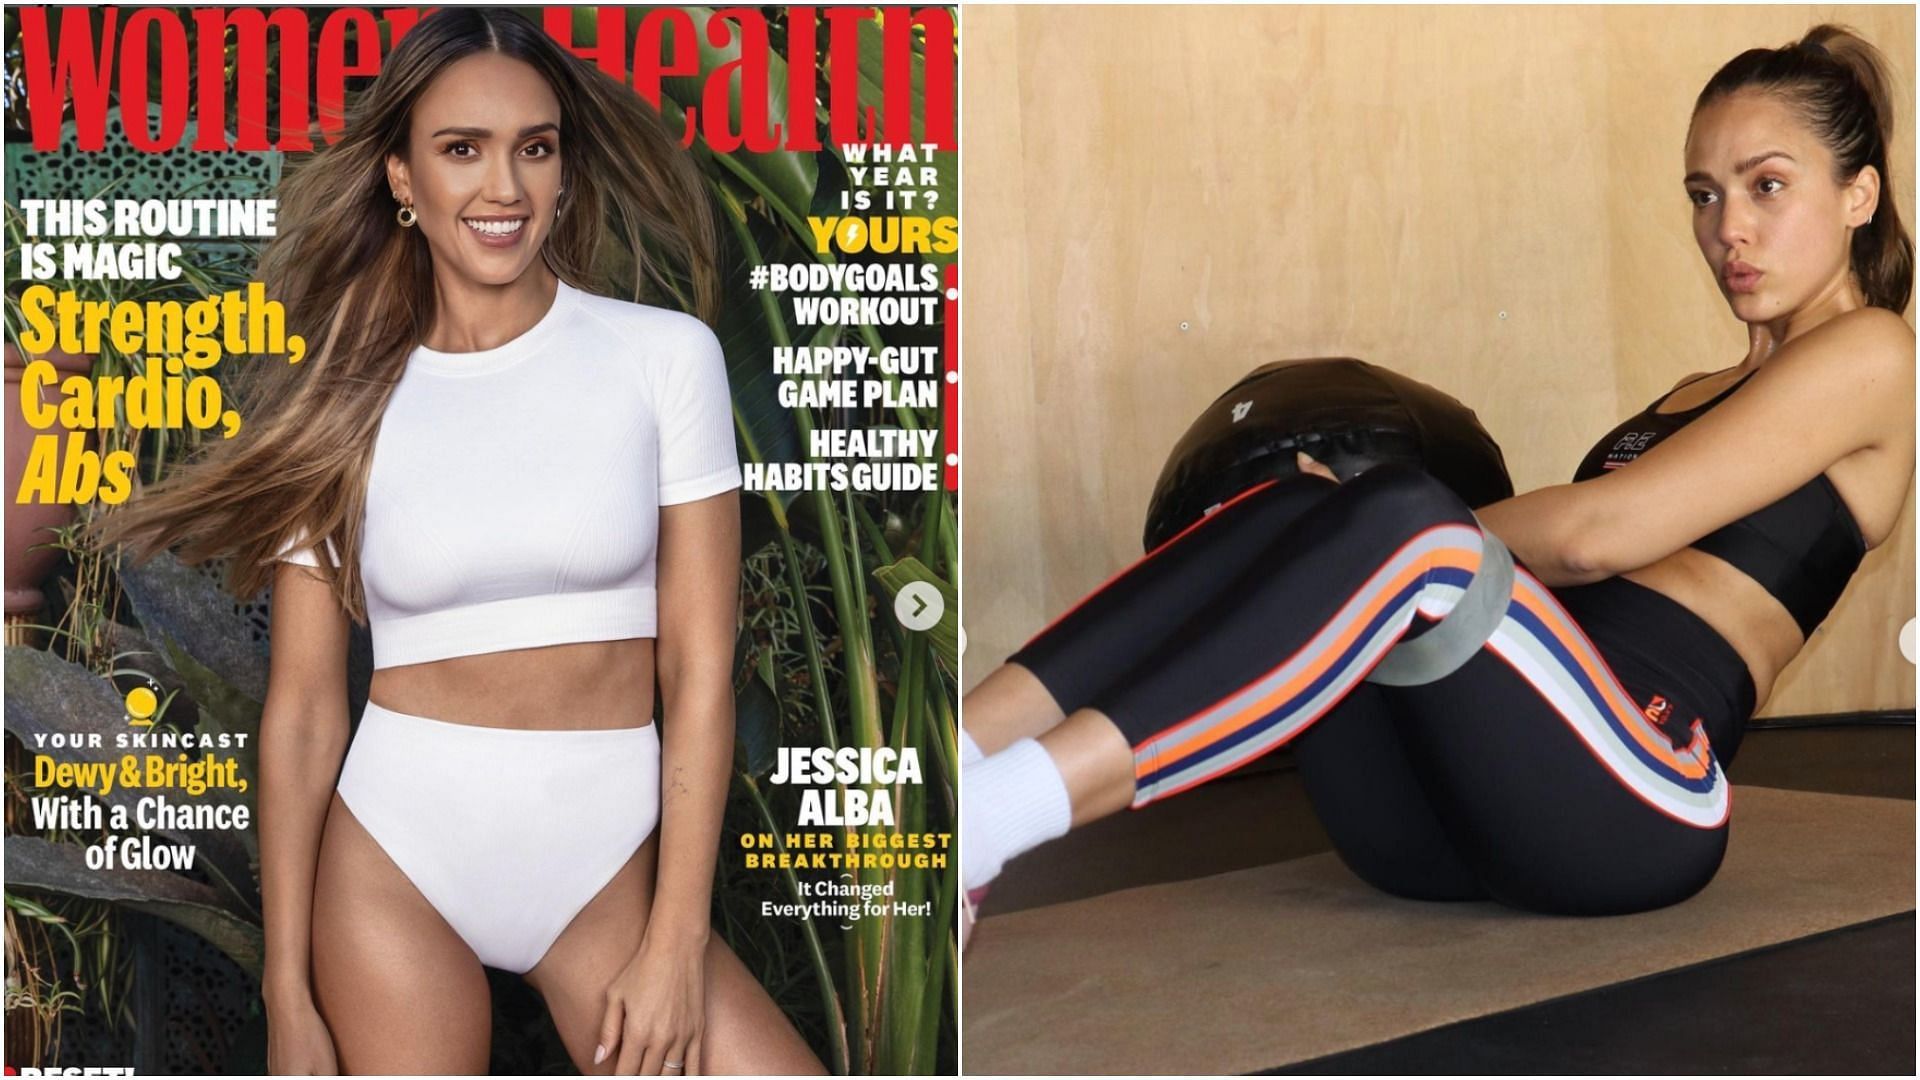 Strengthen your midsection. Images via Instagram/Jessica Alba.